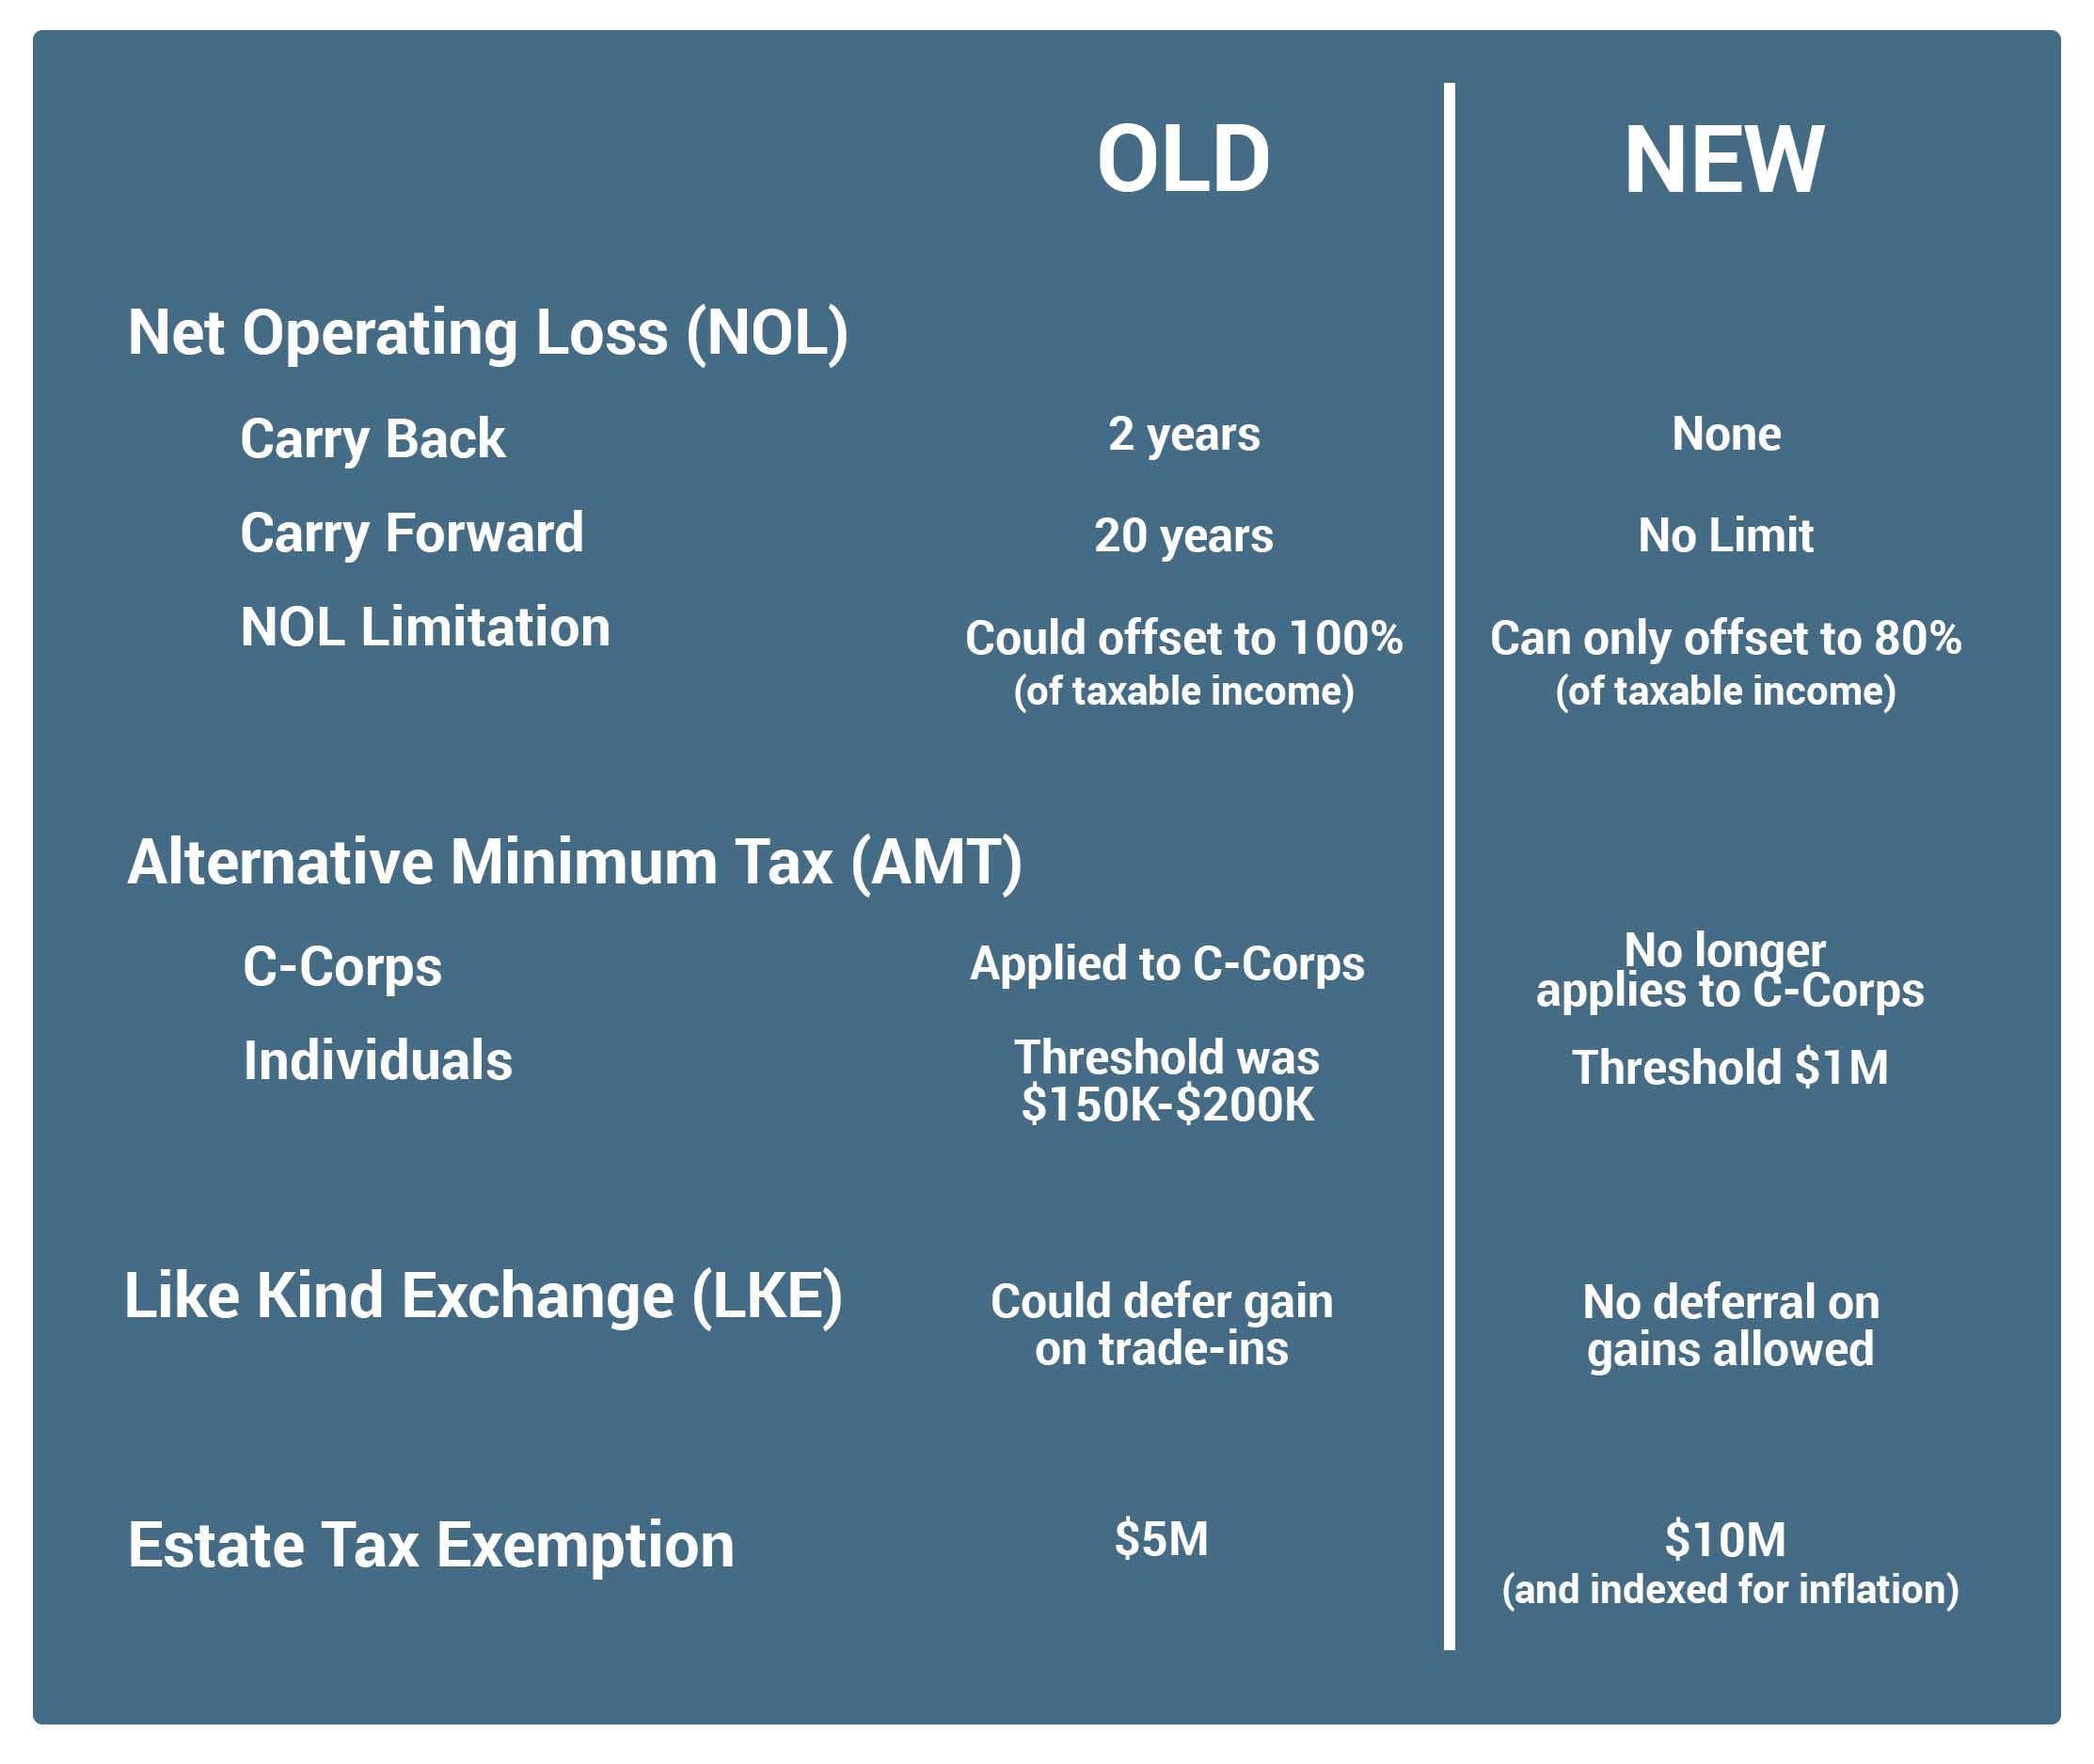 NOL AMT LKE Changes in New Tax Law